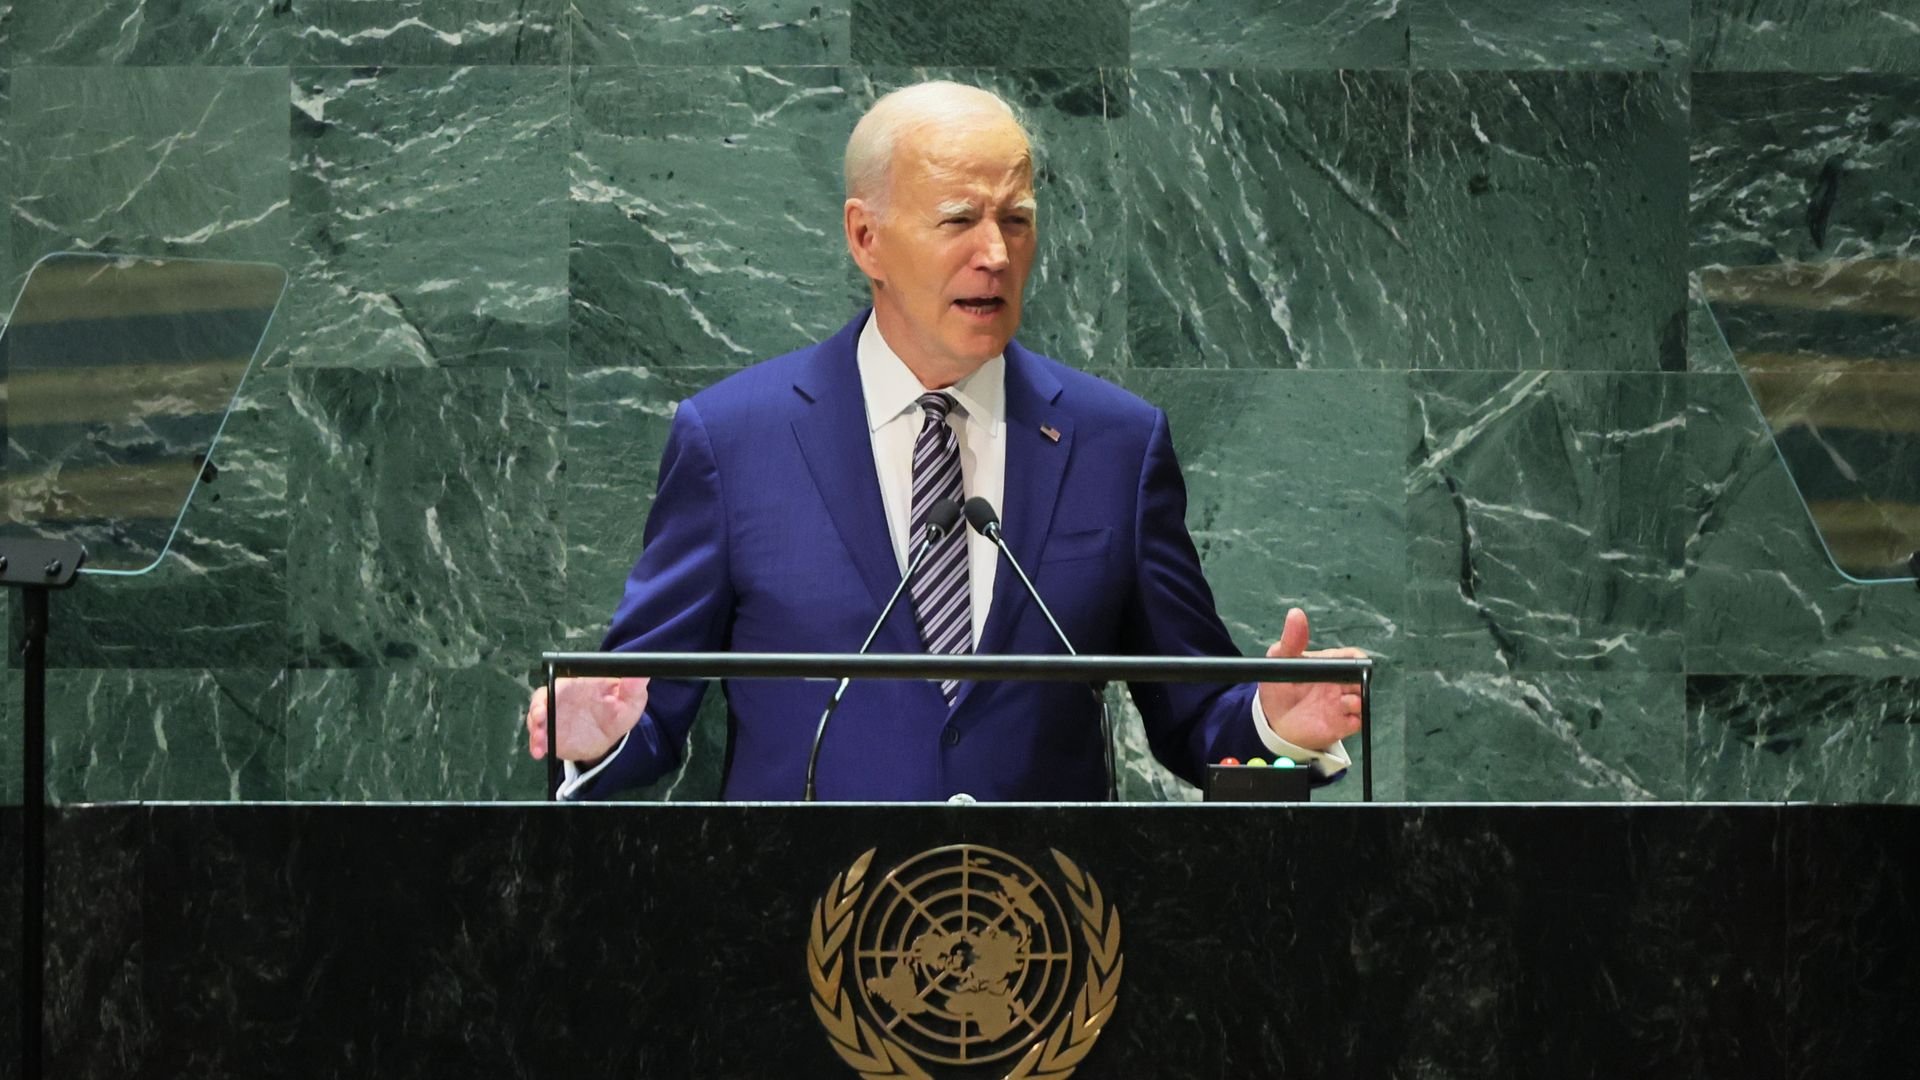 Biden warns against allowing Russia to "brutalize Ukraine" with no consequence